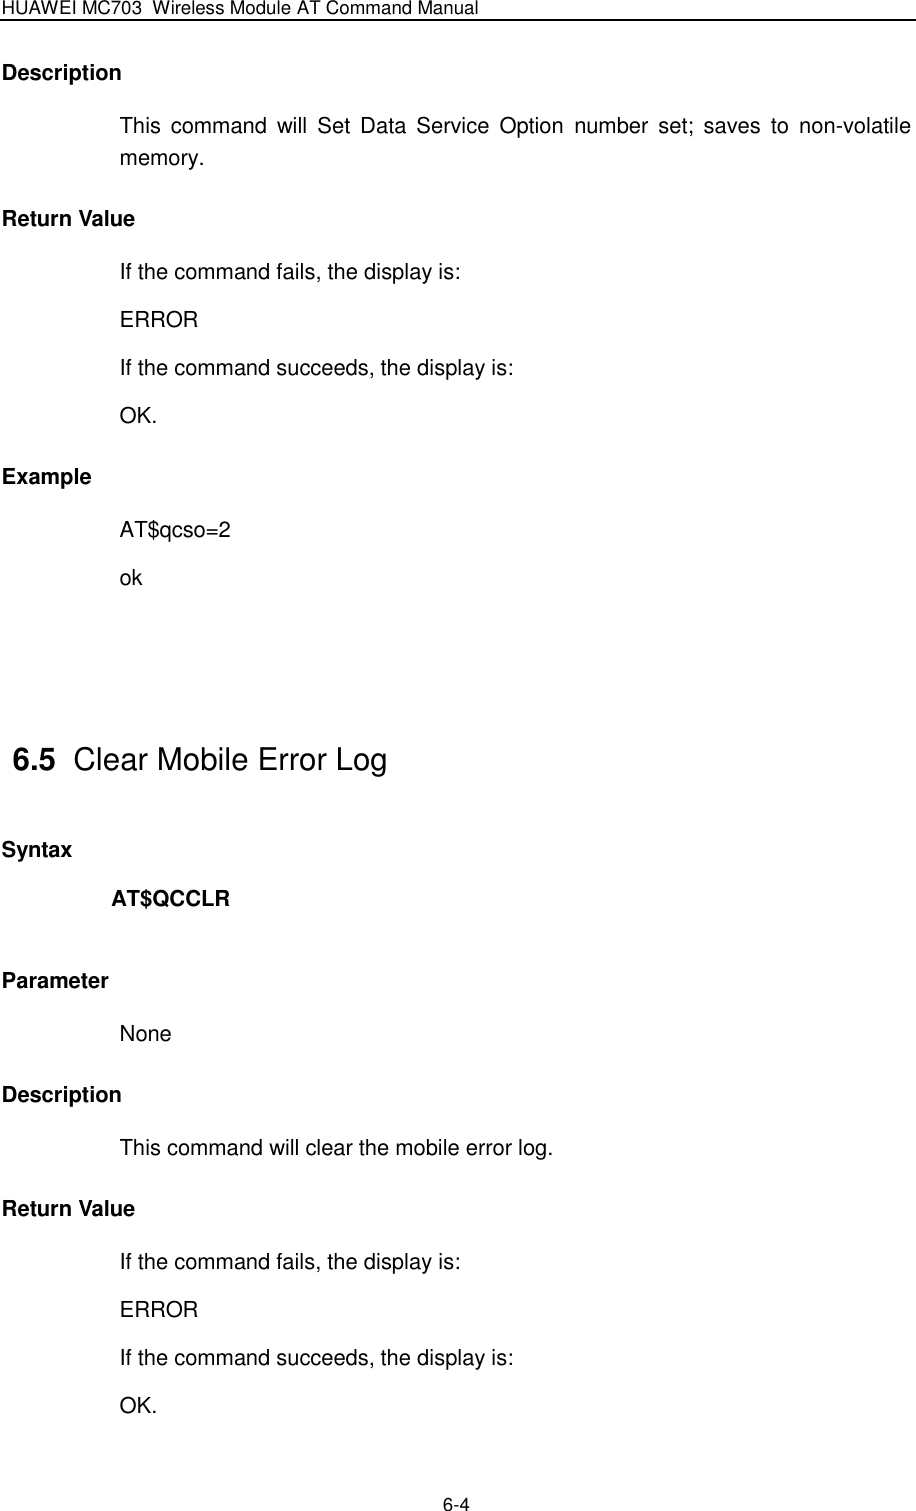 HUAWEI MC703 Wireless Module AT Command Manual   6-4 Description This  command  will  Set Data  Service  Option  number set;  saves  to  non-volatile memory. Return Value If the command fails, the display is: ERROR If the command succeeds, the display is: OK. Example AT$qcso=2 ok   6.5  Clear Mobile Error Log Syntax AT$QCCLR  Parameter None Description This command will clear the mobile error log. Return Value If the command fails, the display is: ERROR If the command succeeds, the display is: OK. 